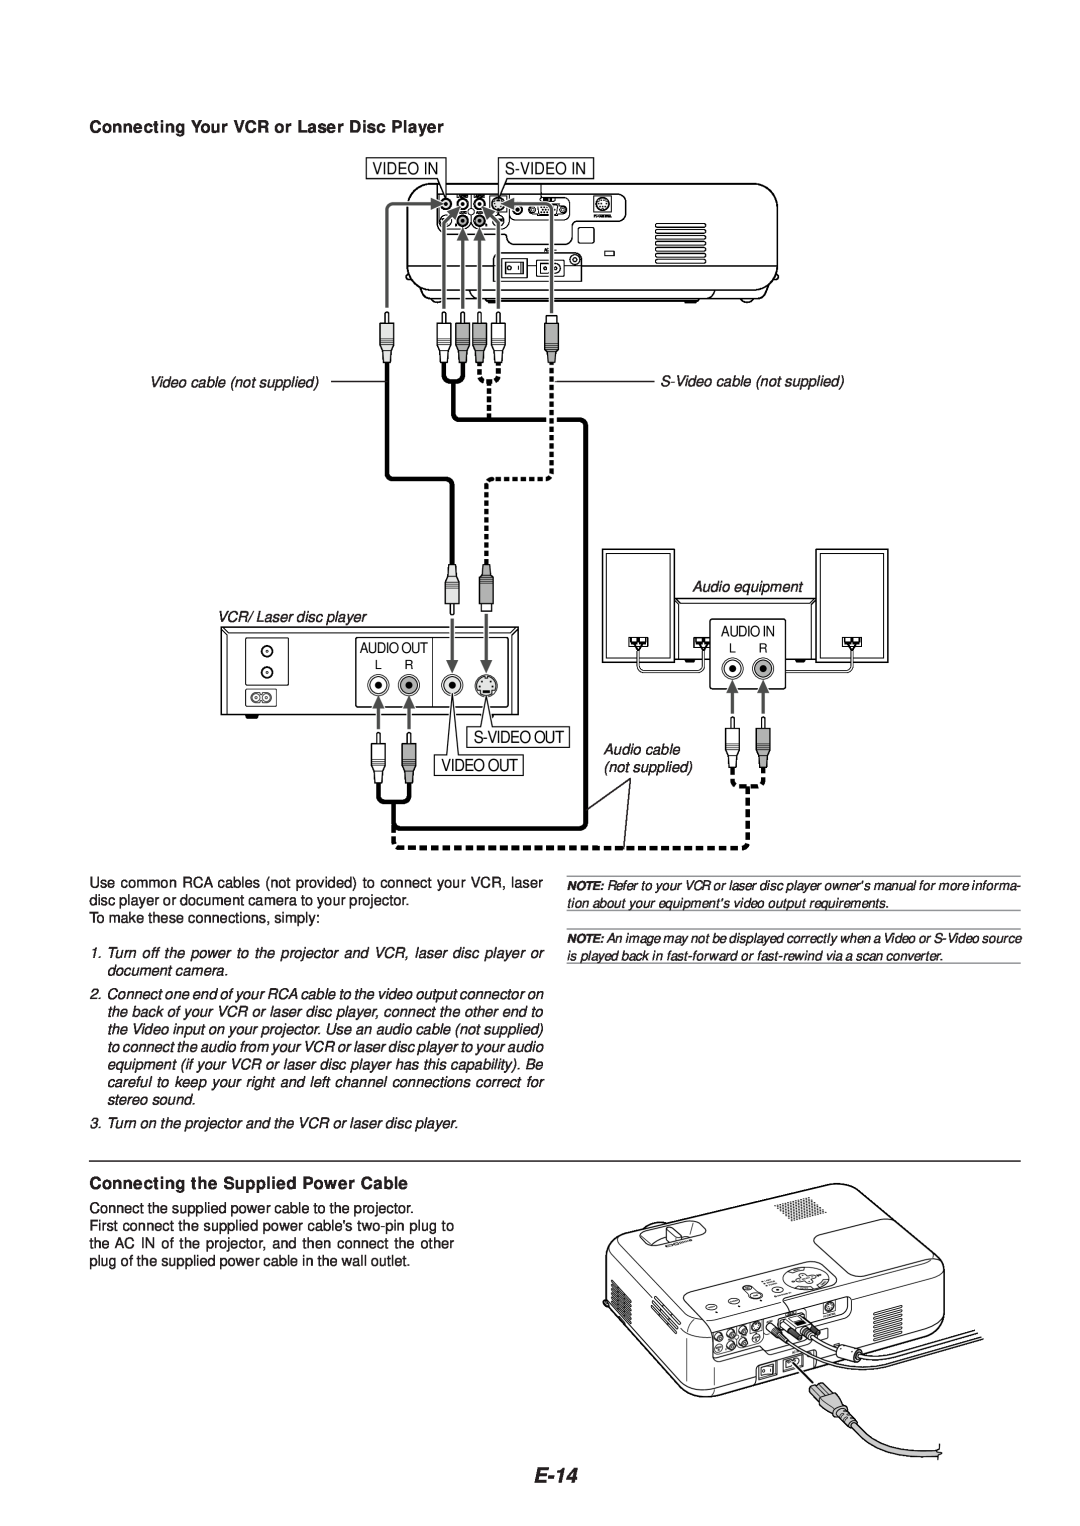 NEC VT46 user manual E-14, Connecting Your VCR or Laser Disc Player, Video In, S-Videoin, S-Videoout, Video Out 